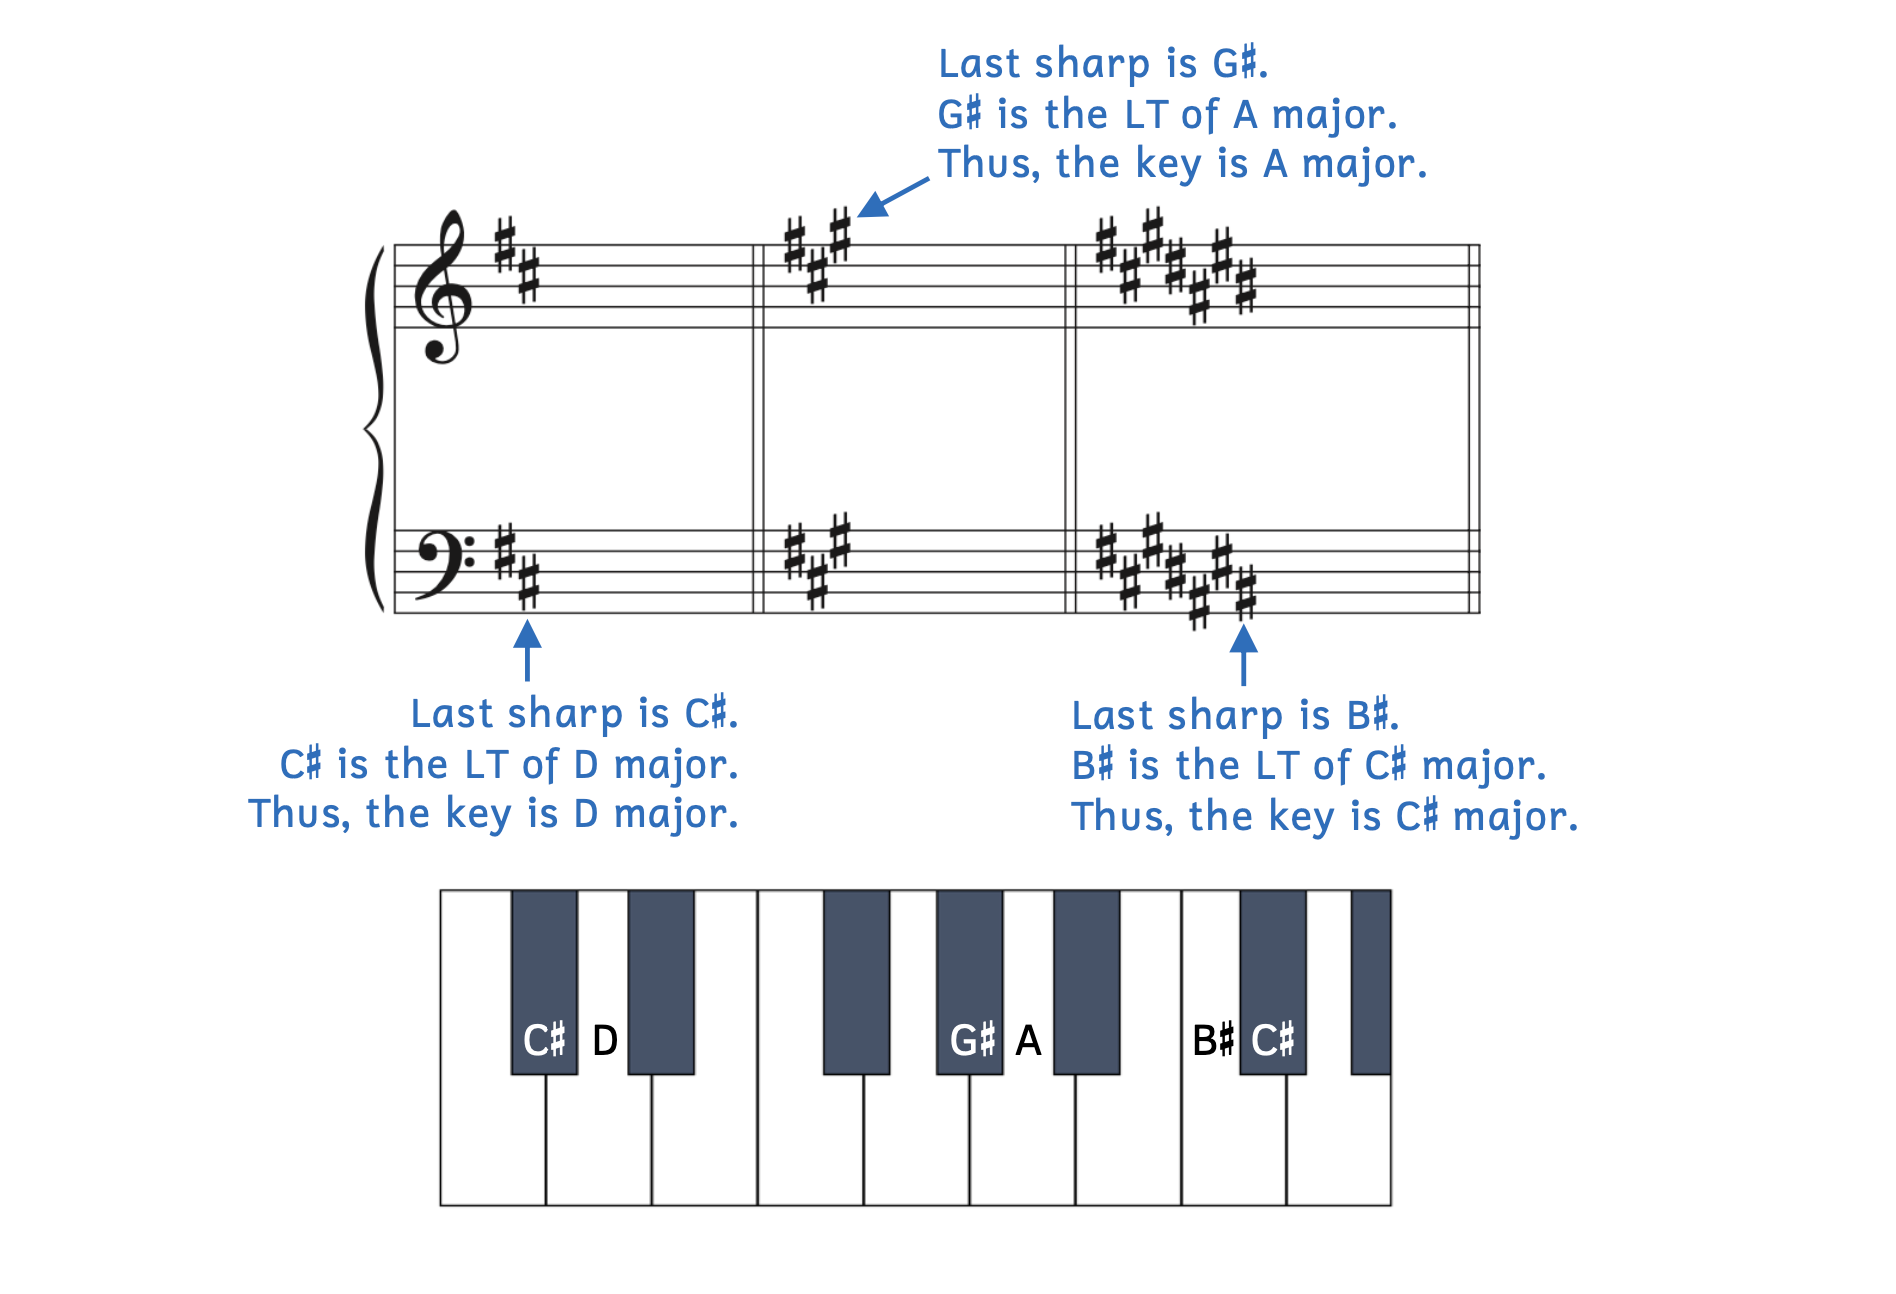 Strategy for identifying major key signatures with sharps. In the first measure, there are two sharps. The last sharp is C-sharp. C-sharp is the leading tone of D major. Thus, the key is D major. In the second measure, the last sharp is G-sharp. G-sharp is the leading tone of A. Thus, the key is A major. In the last measure, the last sharp is B-sharp. B-sharp is the leading tone of C-sharp major. Thus, the key is C-sharp major.